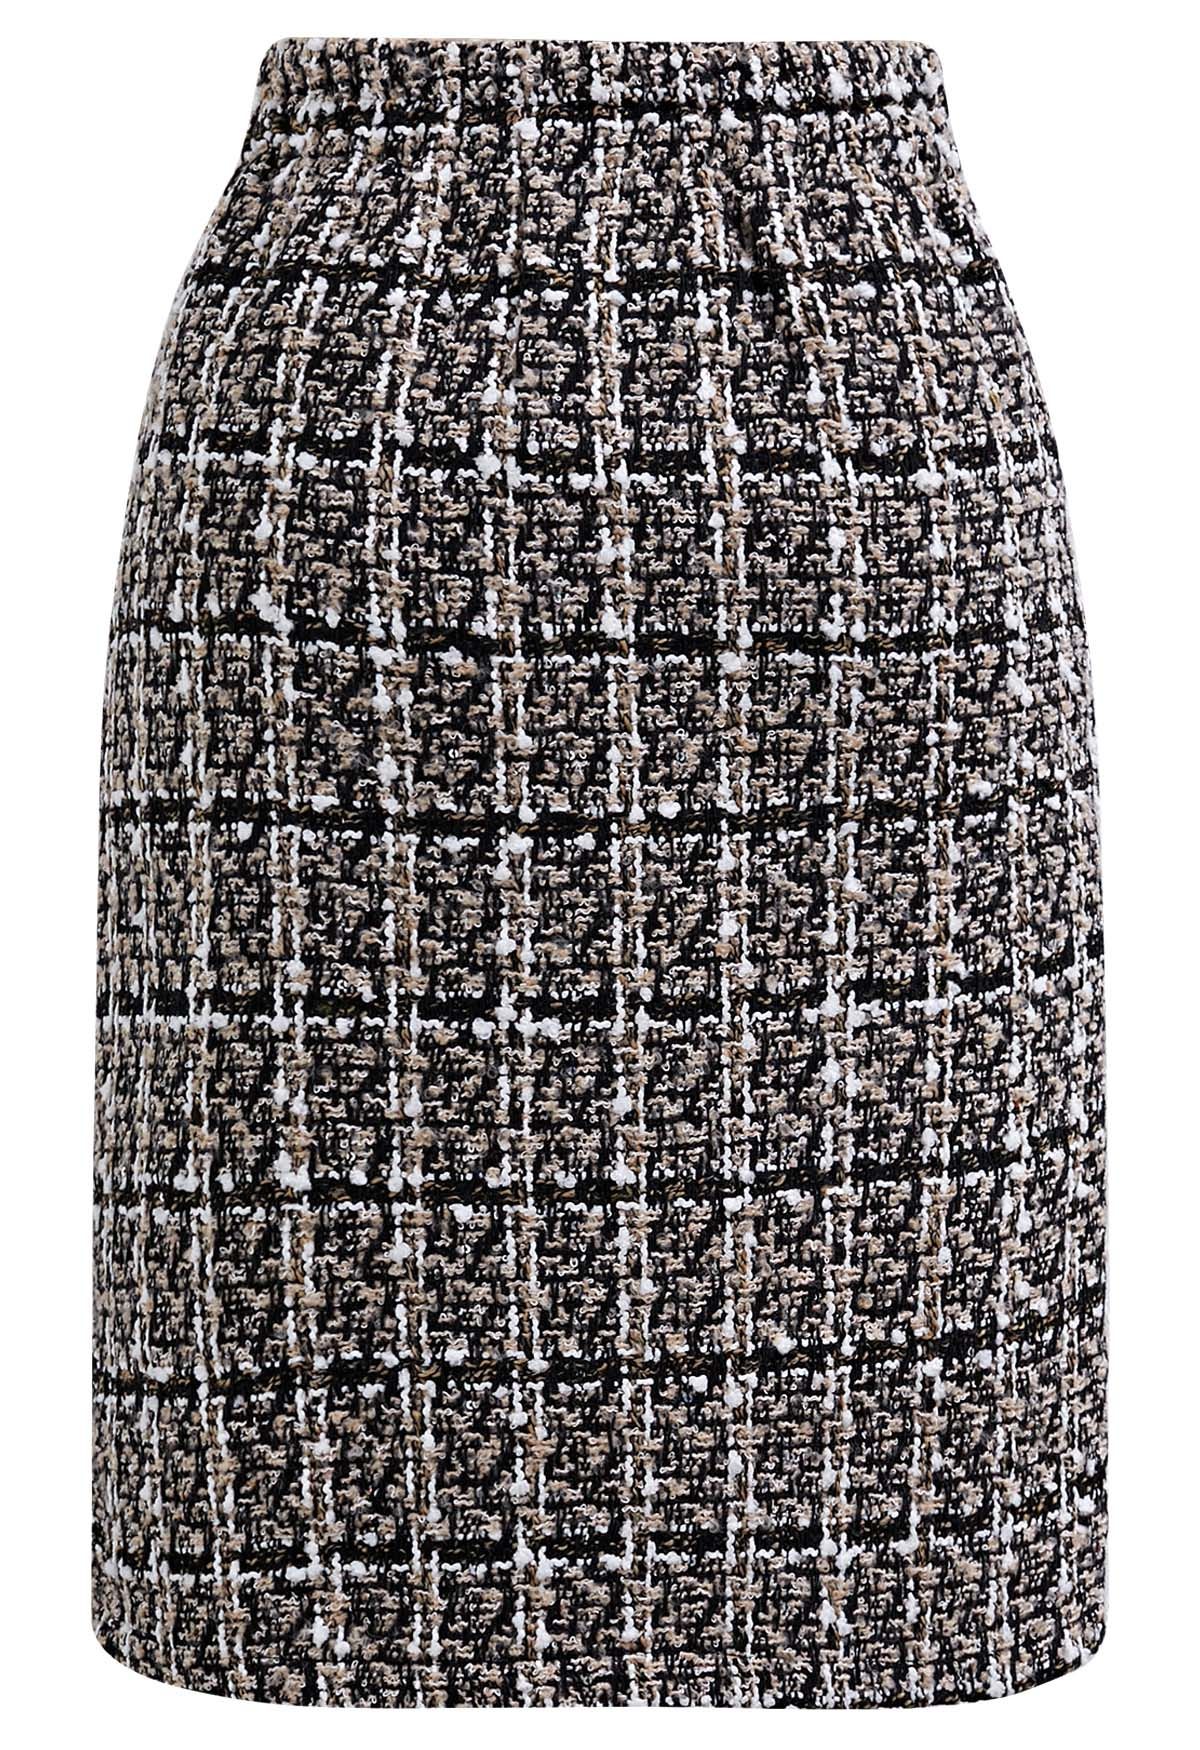 Patch Pocket Buttoned Check Tweed Skirt in Light Tan - Retro, Indie and ...